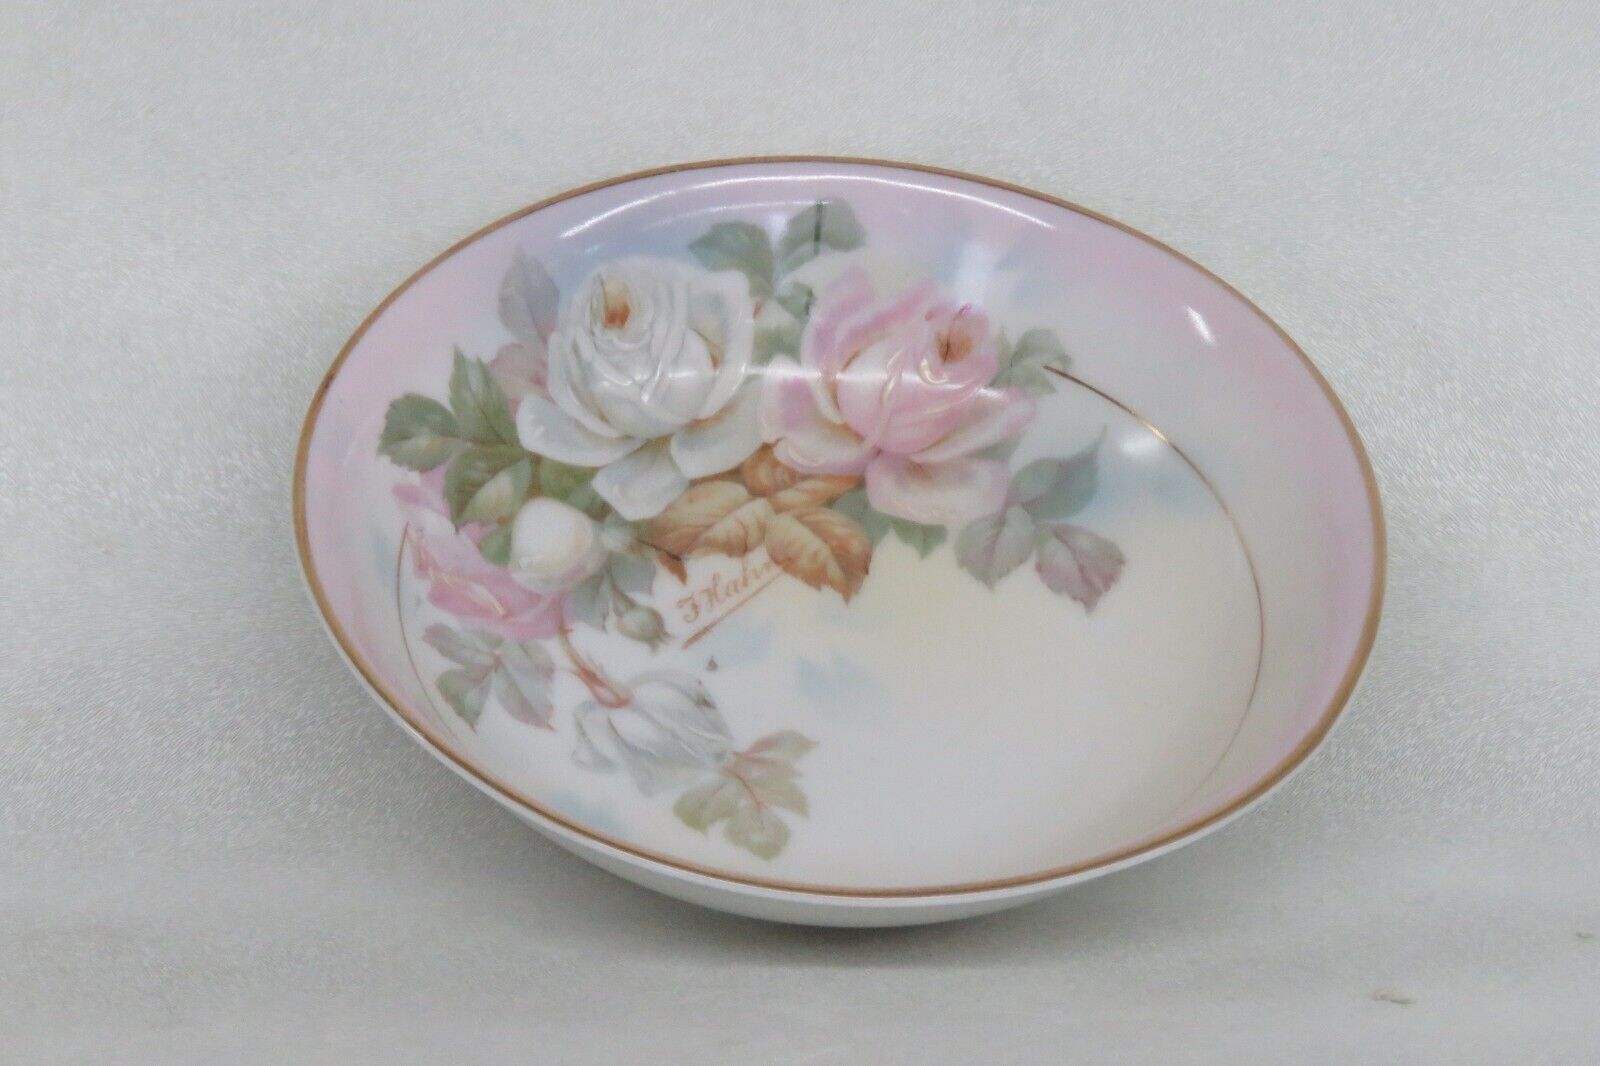 Royal Rudolstadt Prussia F Hahn Porcelain Roses Small Bowl Candy Dish 3179B